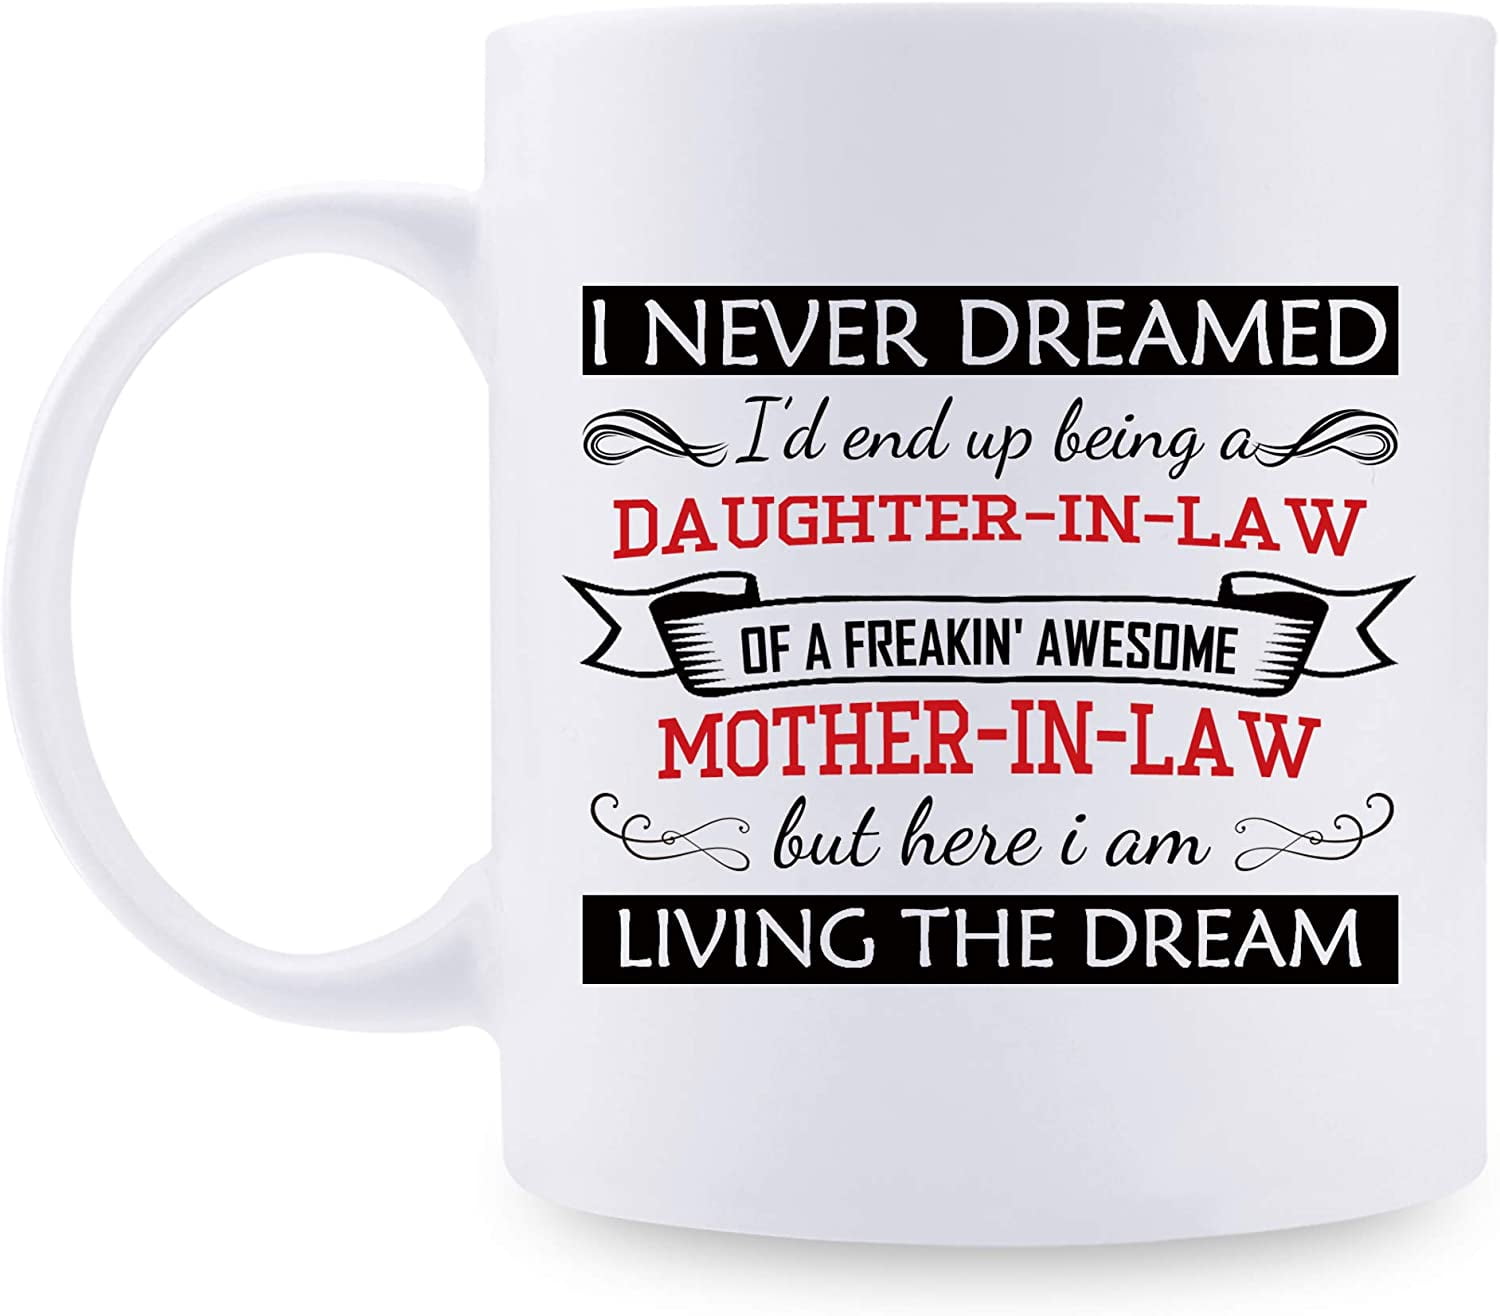 Details about   Coffee Cup Mug Travel 11 15 Never Dreamed Be Super Cool Grandma Here Killing It 